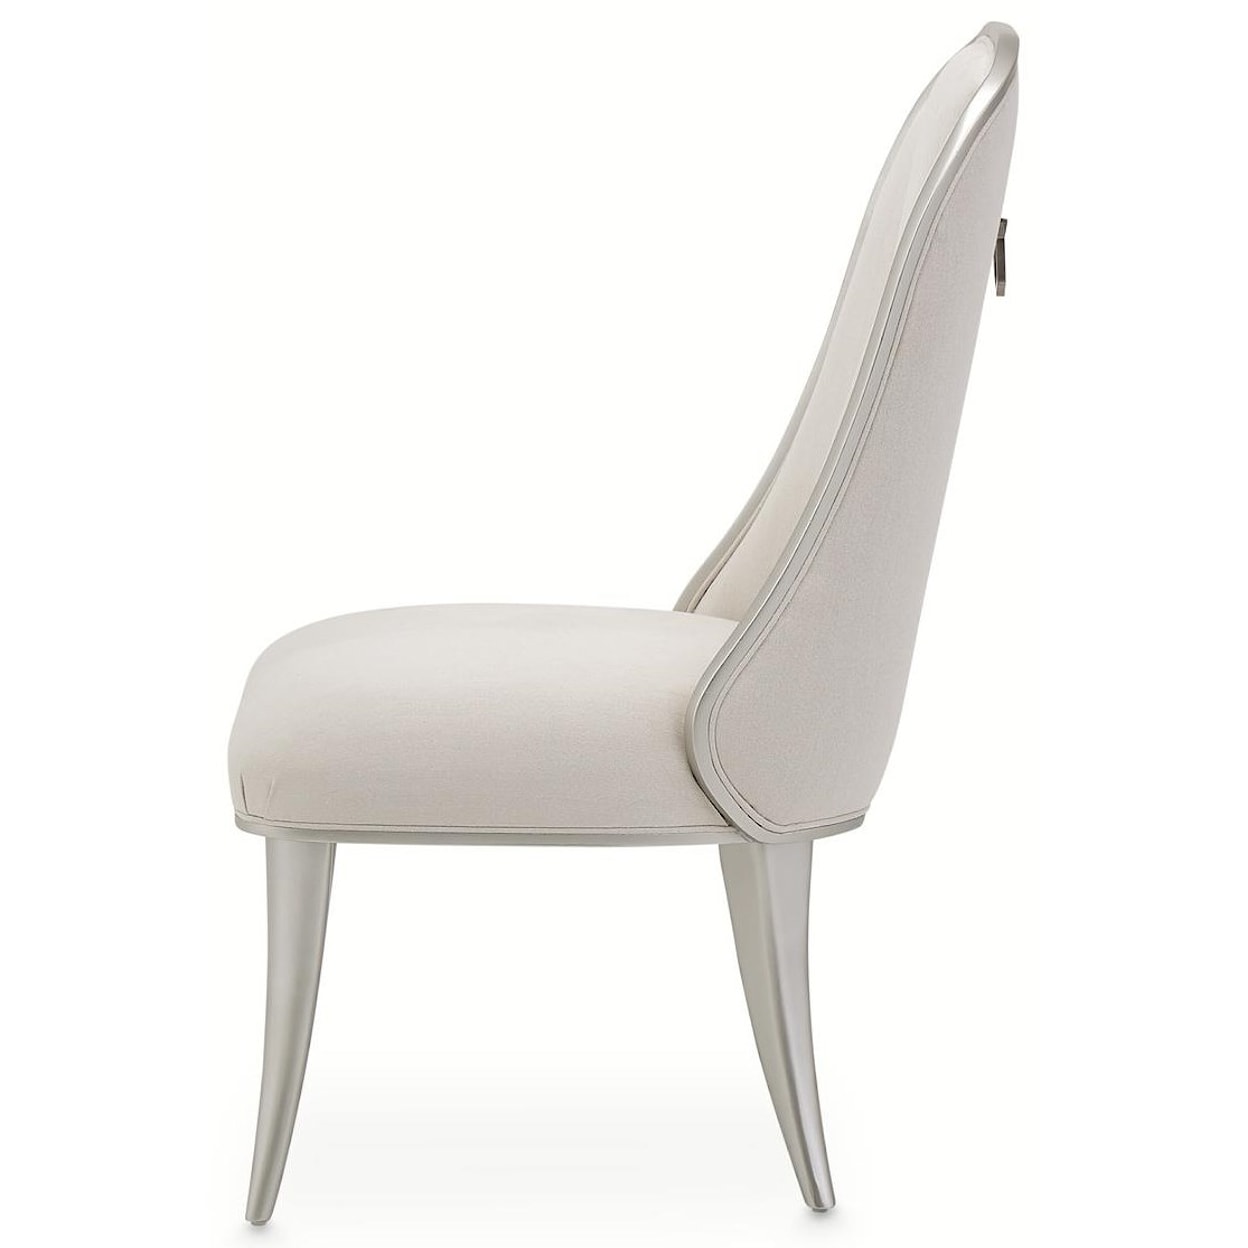 Michael Amini Penthouse Dining Side Chair